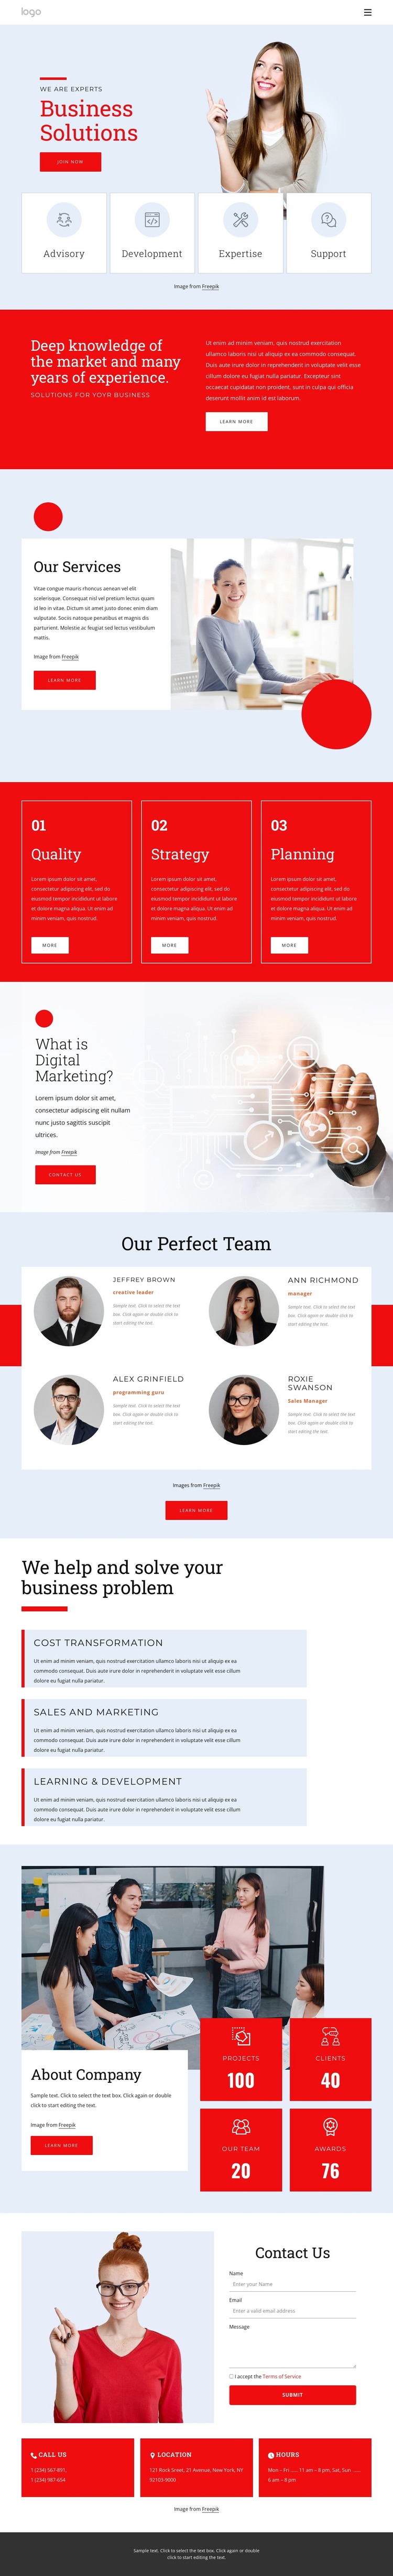 We are experts in business solutions WordPress Theme